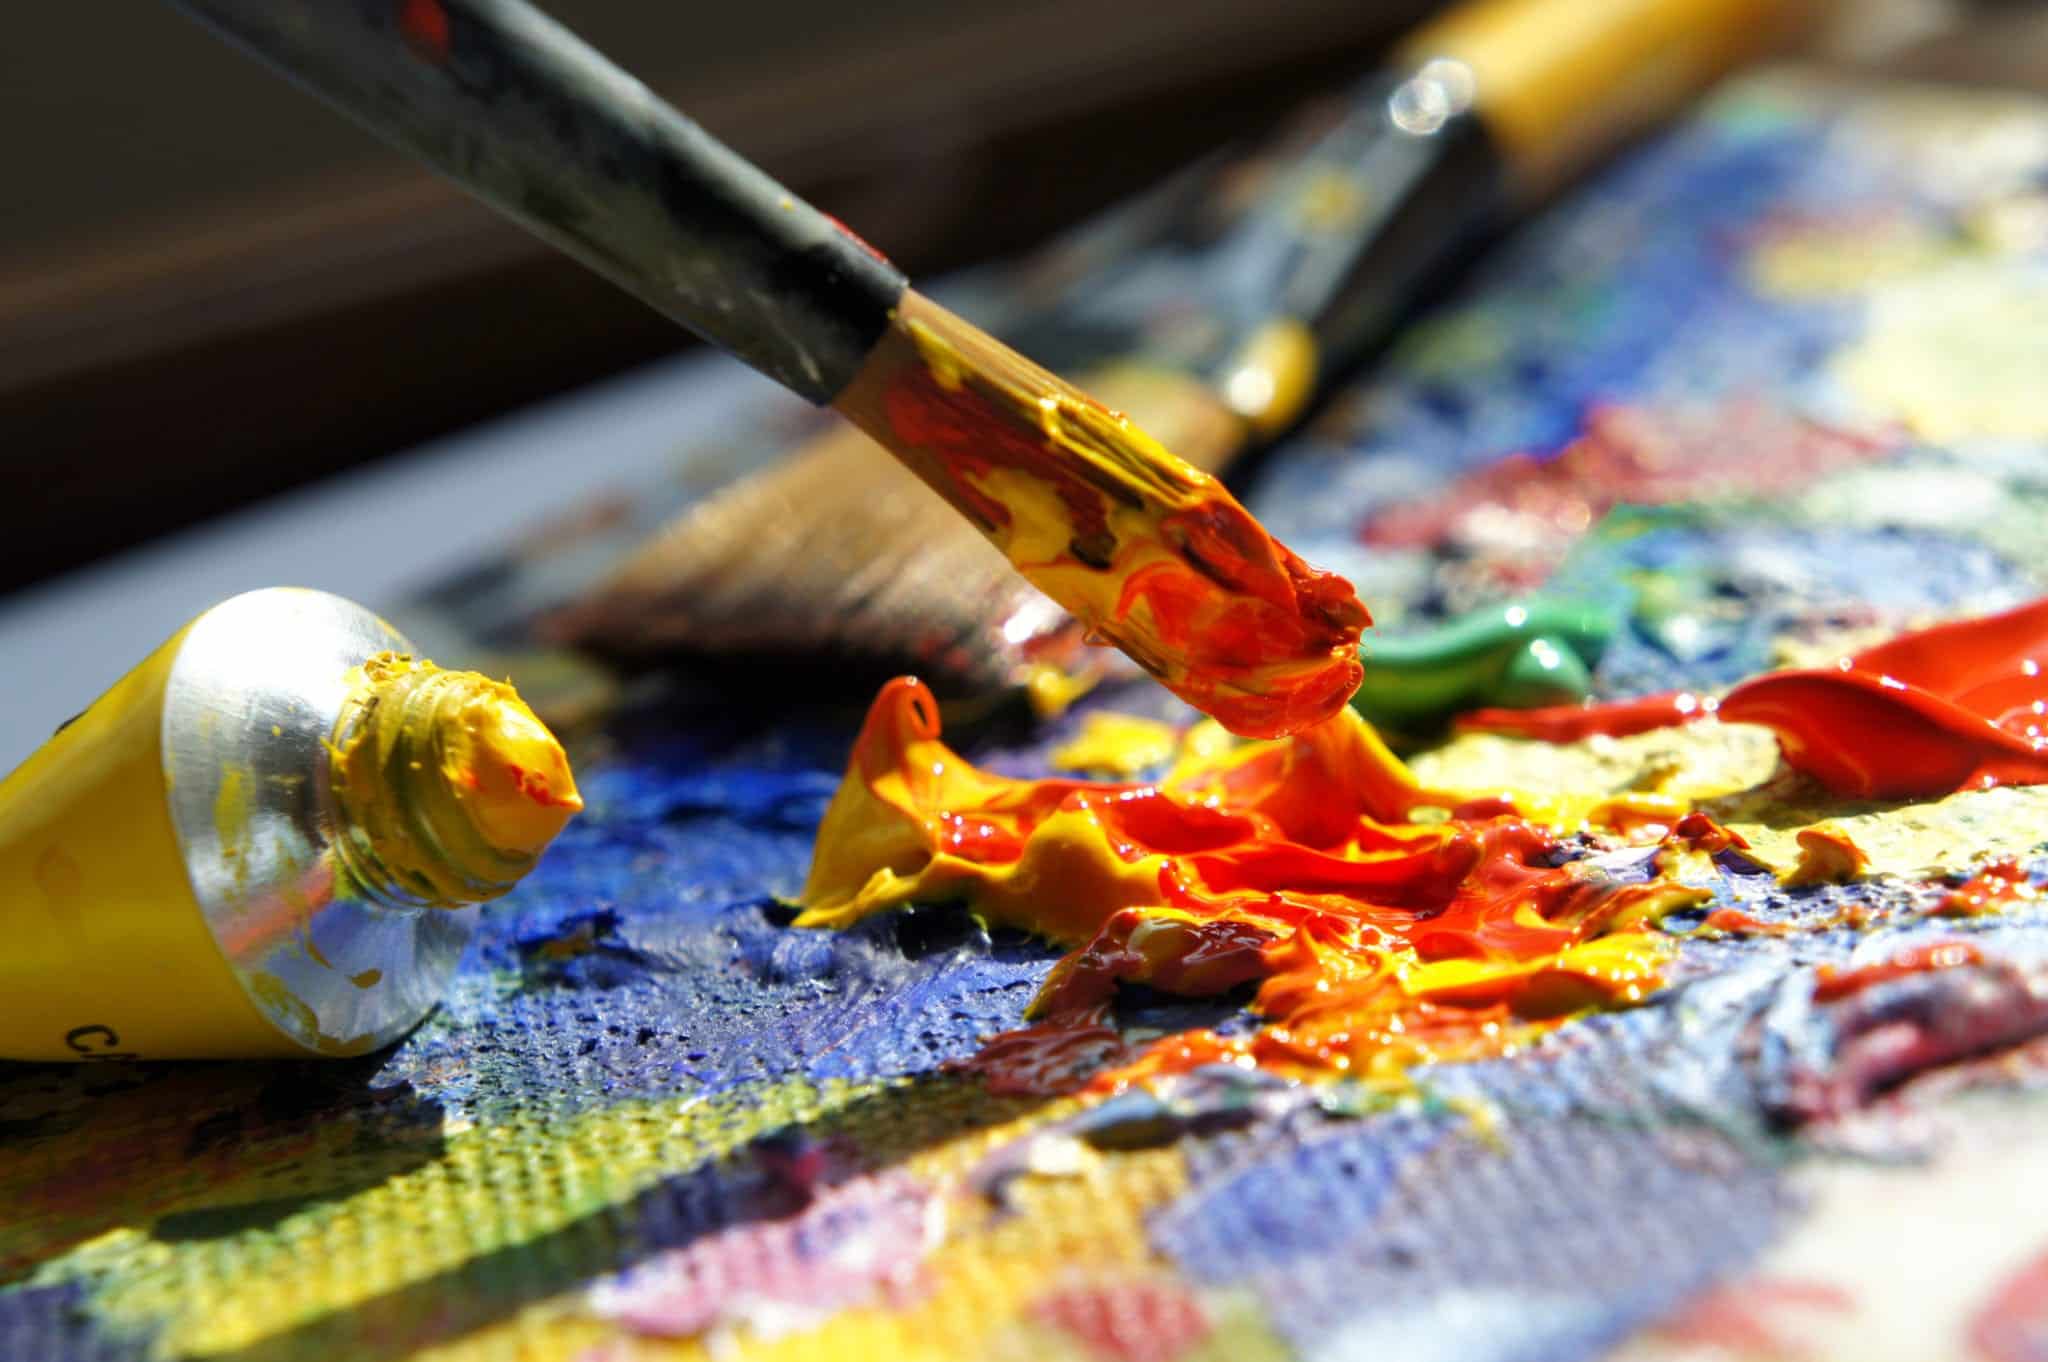 5 Steps to Building an Art and Customization Business